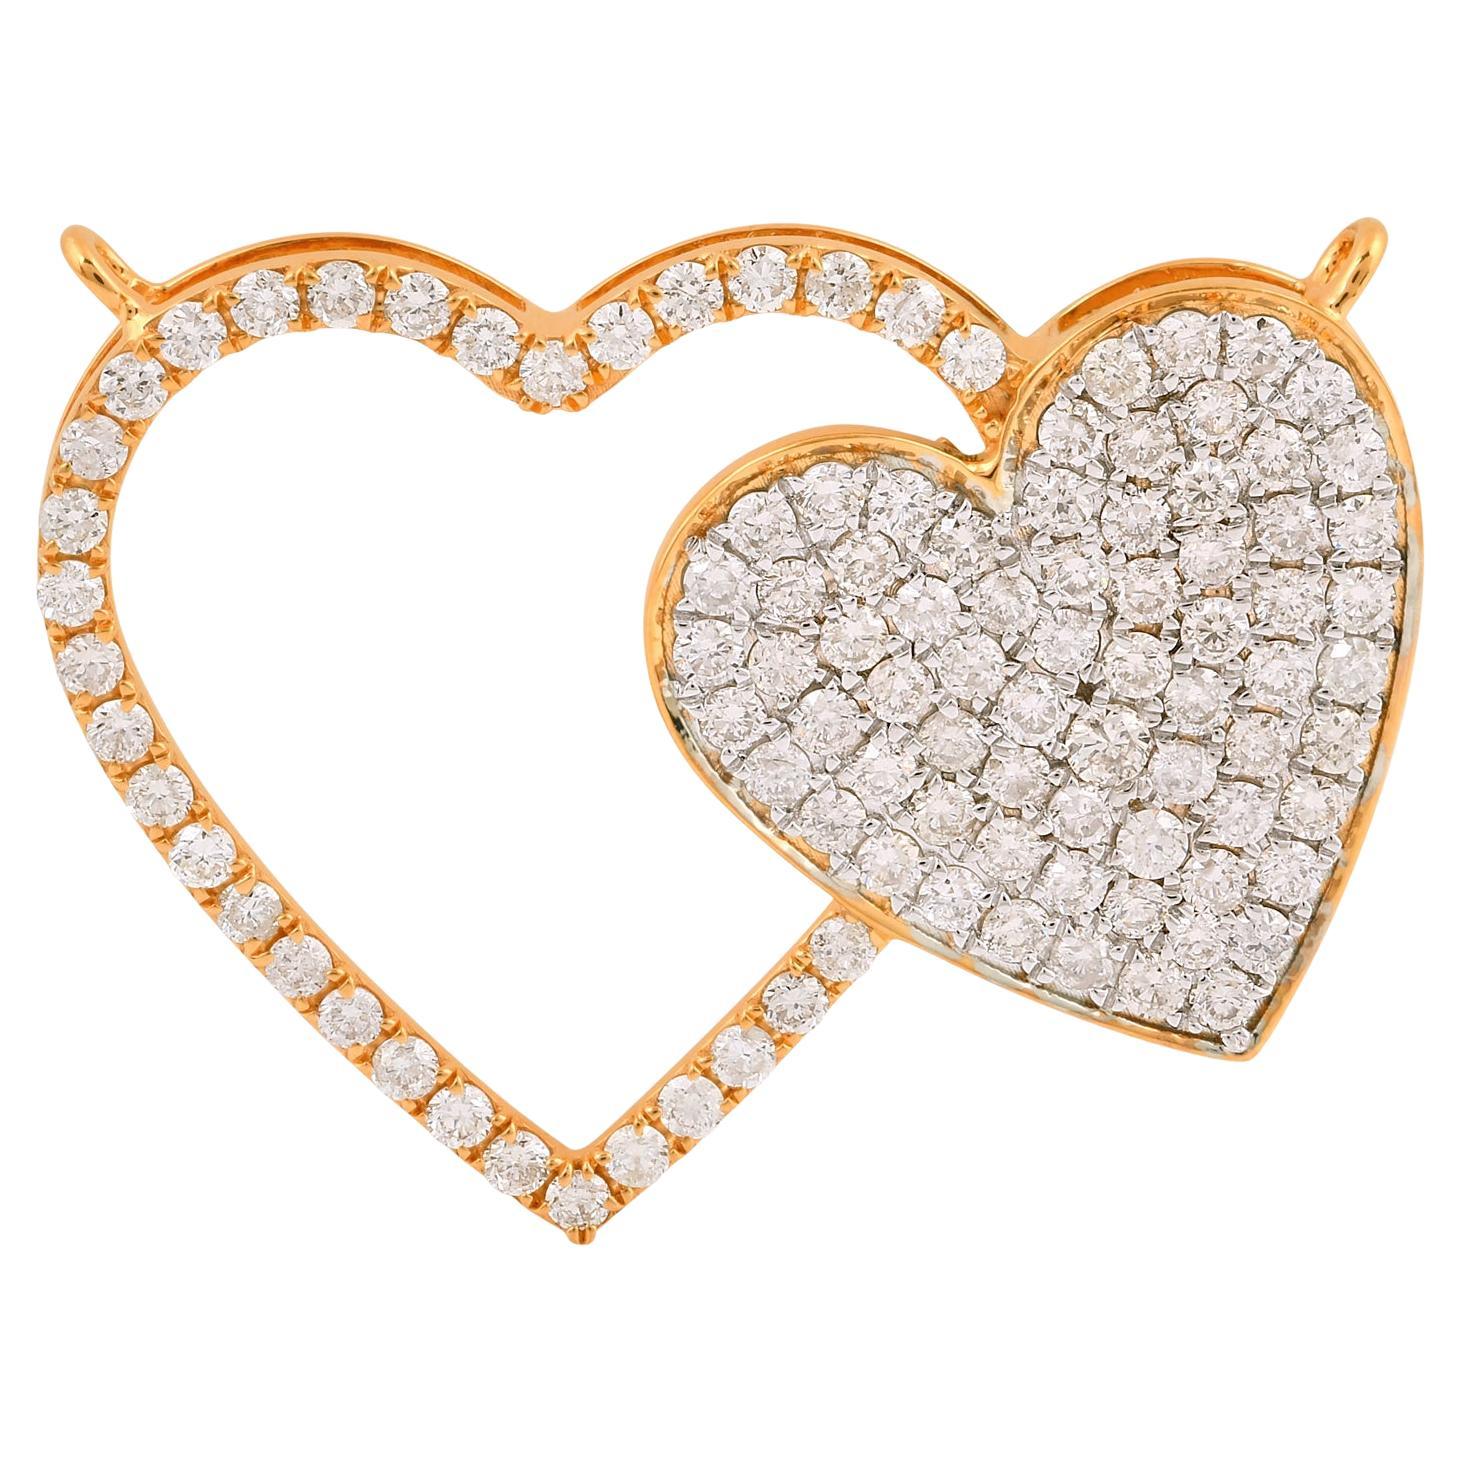 1.50 Carat Diamond Pave Double Heart Charm Pendant Solid 18k Yellow Gold Jewelry For Sale